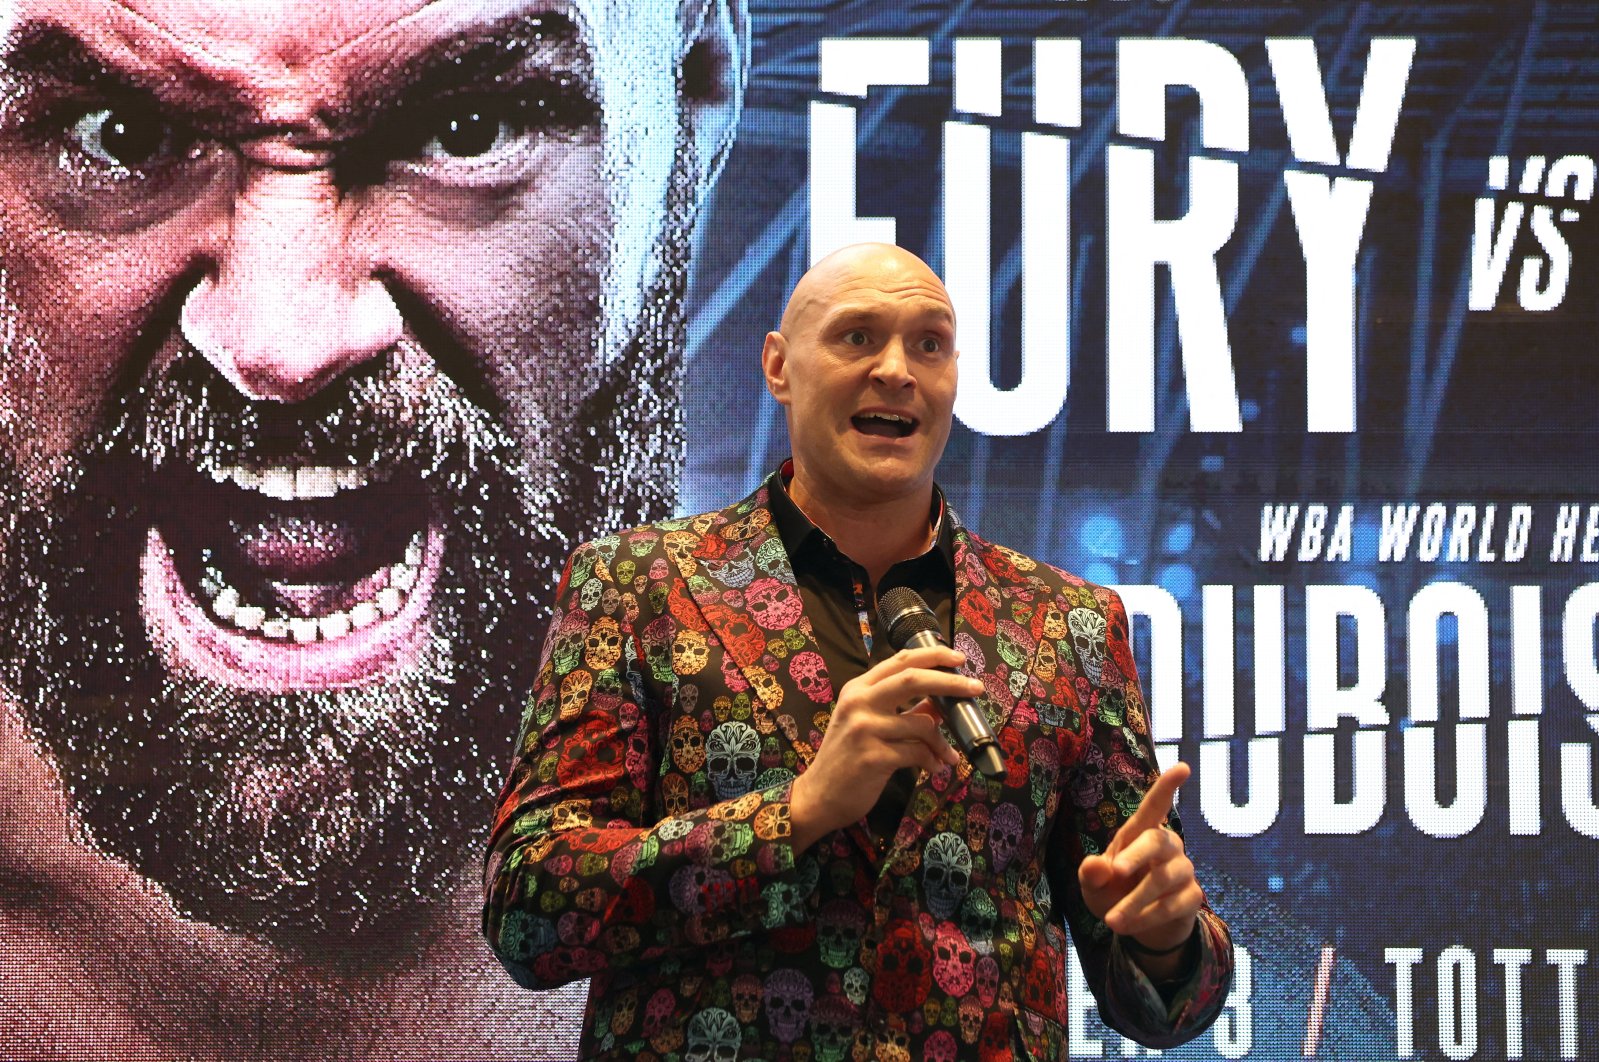 Tyson Fury speaks during the press conference at the Tottenham Hotspur Stadium, London, Britain, Oct. 20, 2022. (Reuters Photo)